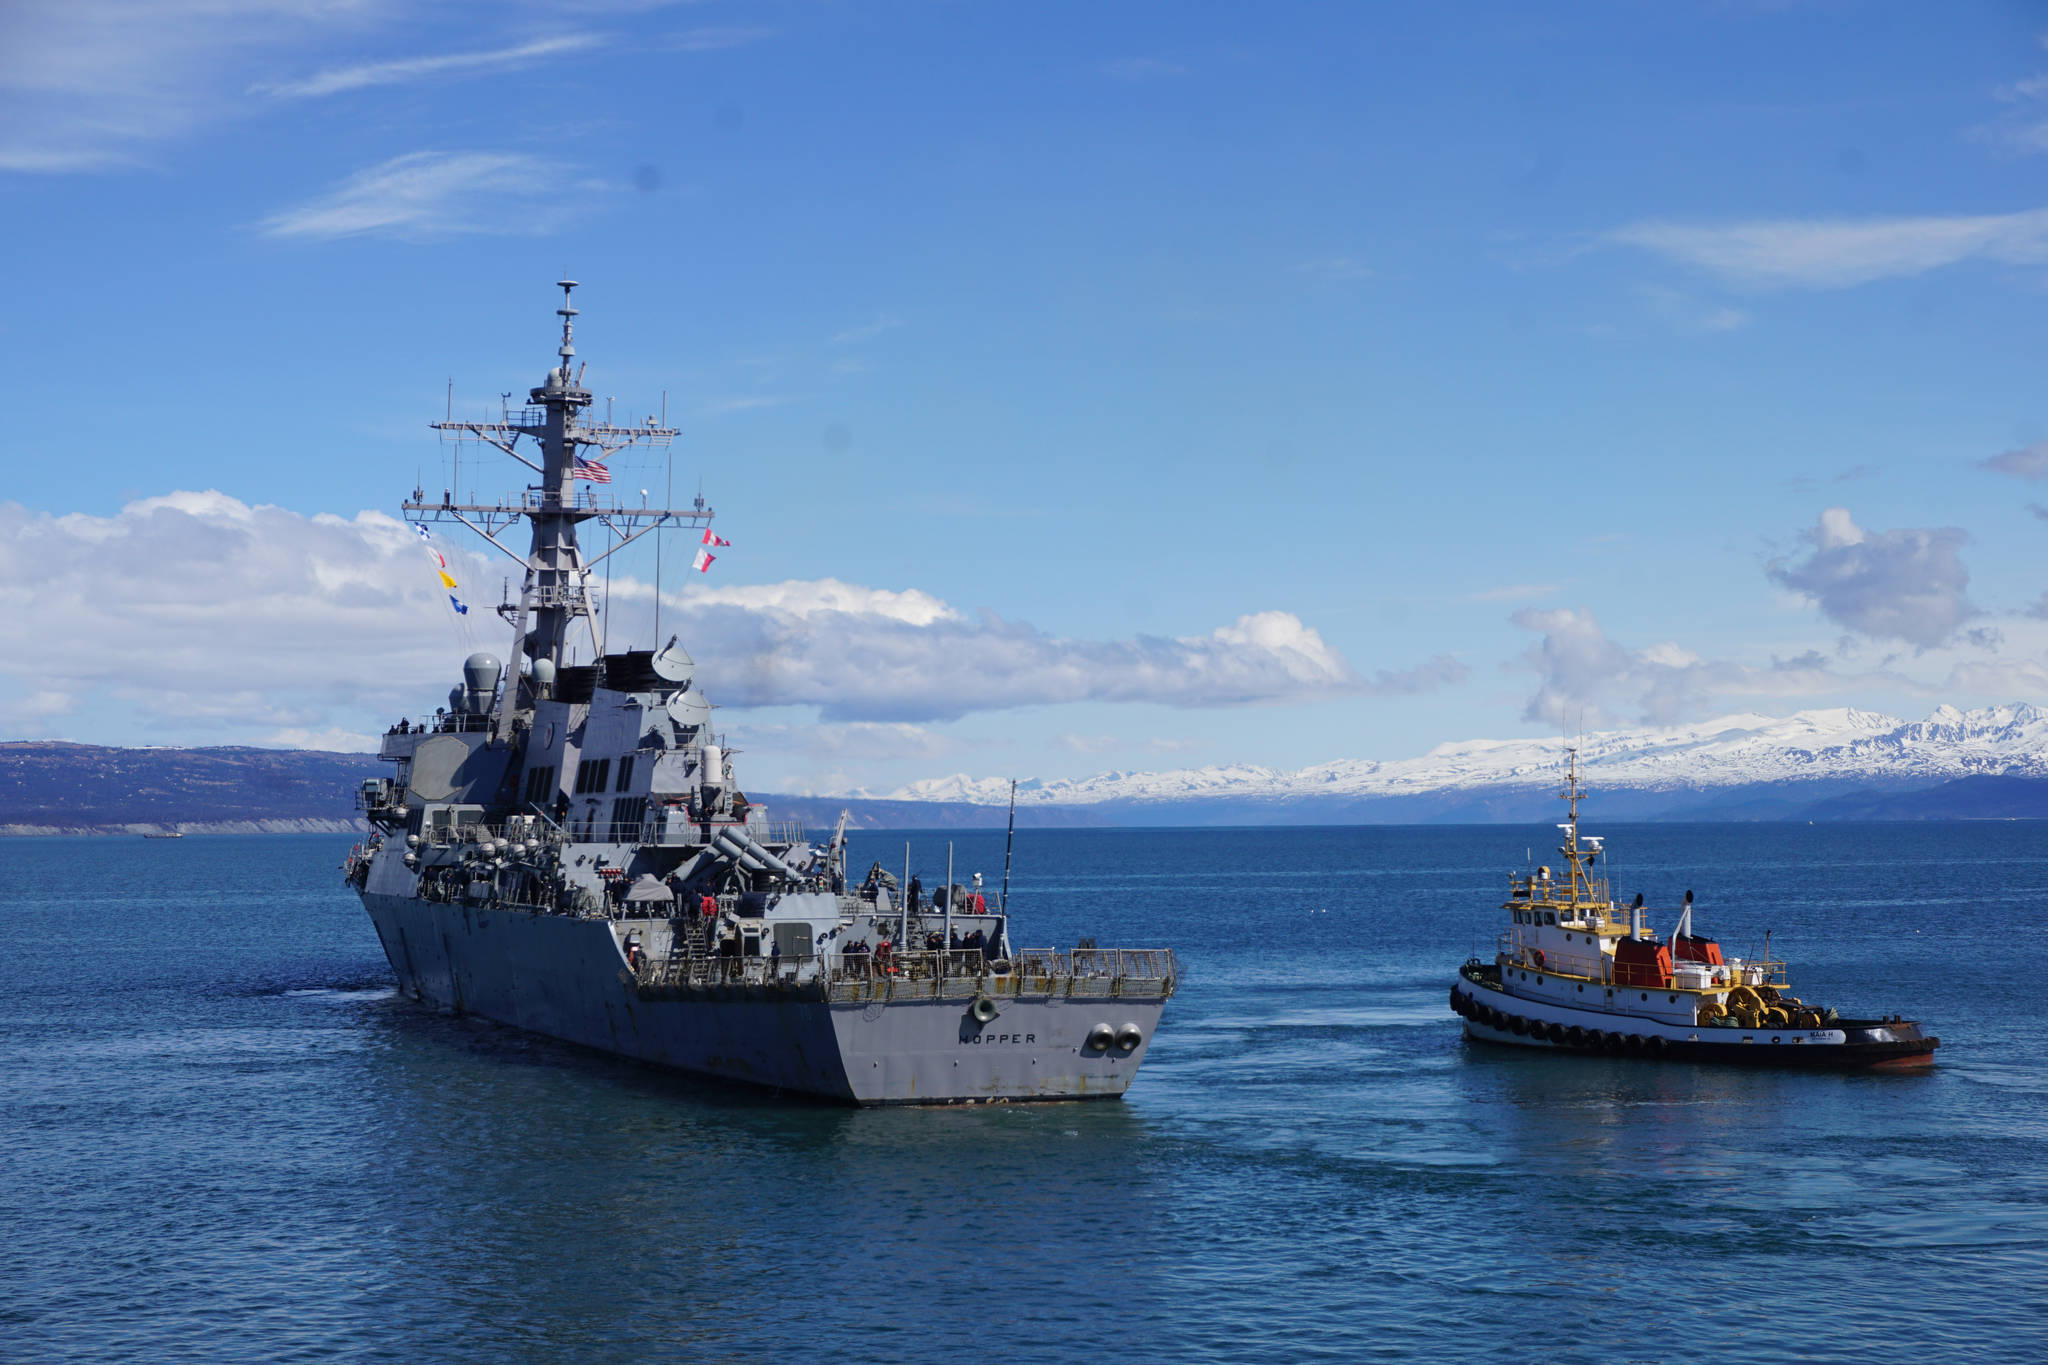 The USS Hopper moves away from the Deep Water Dock on the Homer Spit about noon Saturday, April 29, 2017. A crowd of about 200 people on the beach and another 200 at the dock greeted the Arleigh-Burke class destroyer as it arrived in Alaska. A minus 4.6 low tide at 11:37 a.m. and the wrong dock face prevented Hopper from docking at the Deep Water Dock as planned, and she was to attempt docking later in the afternoon. (Photo by Michael Armstrong/Homer News)